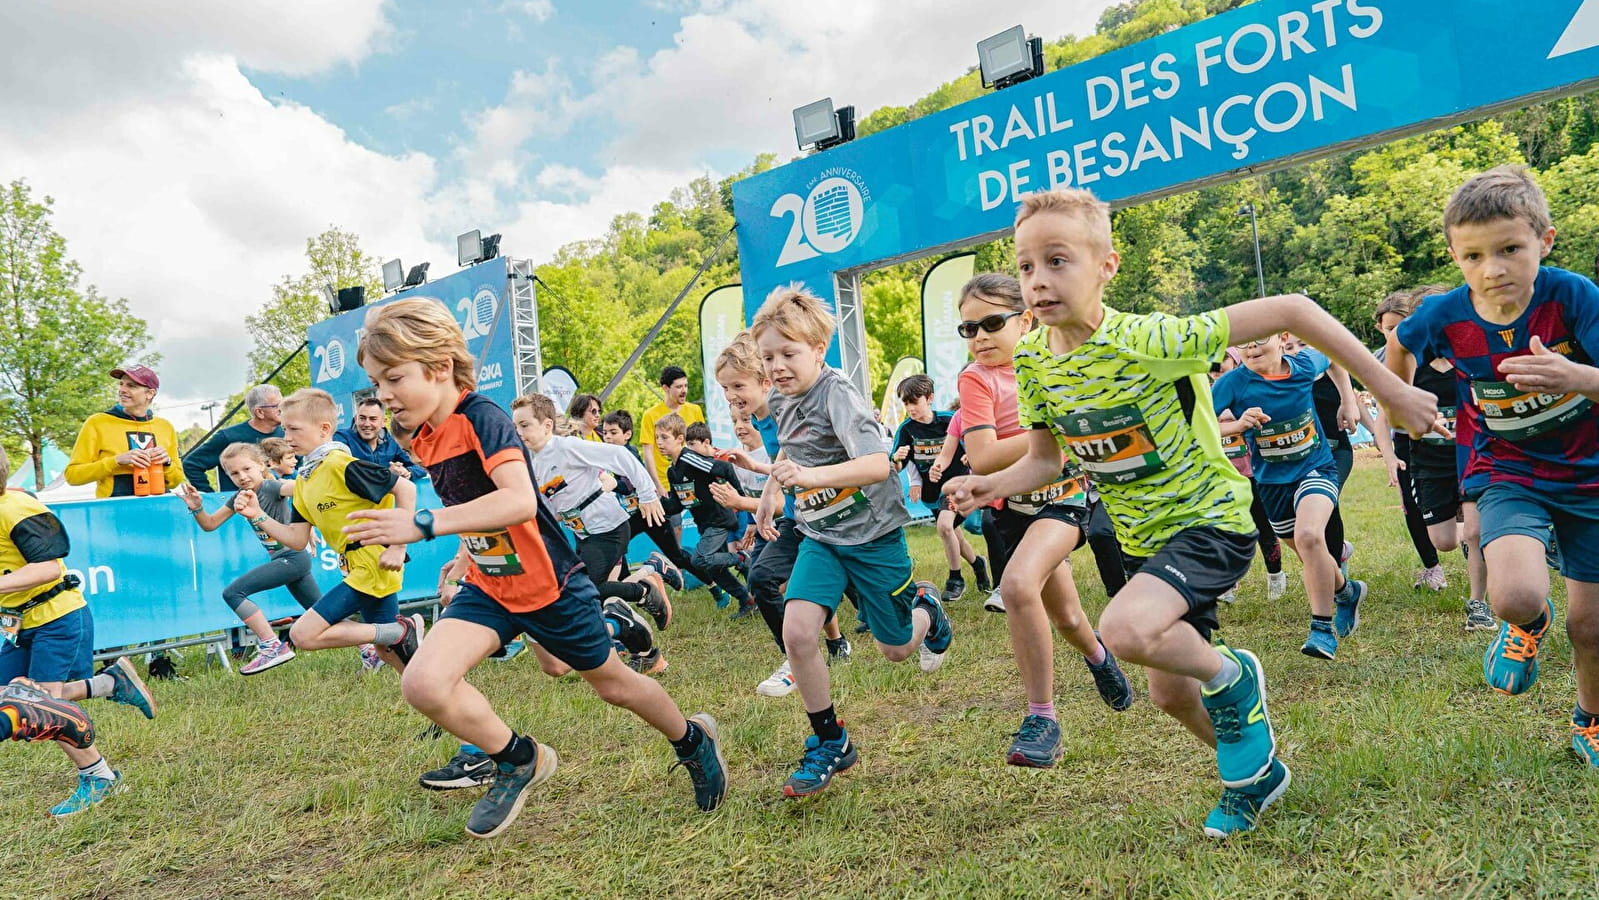 Trail des forts